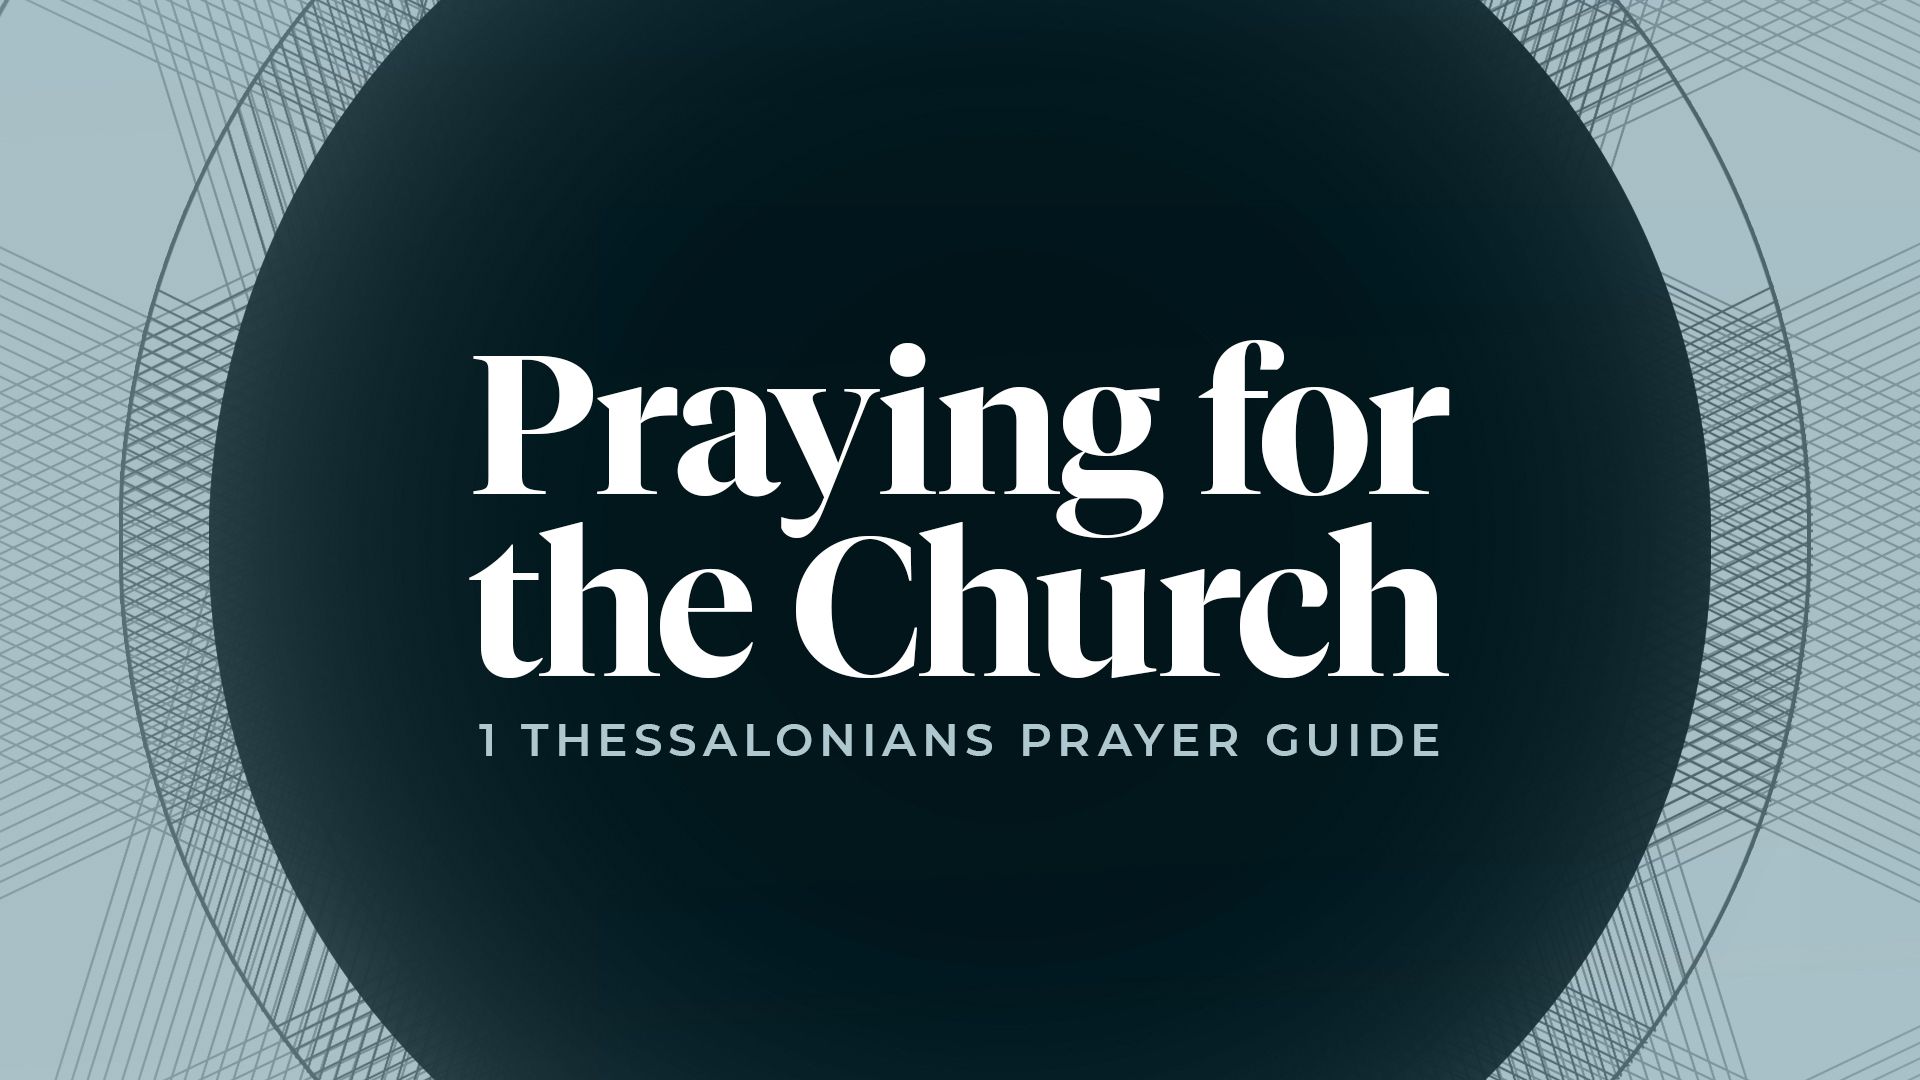 Praying for this church in light of the Thessalonian church Hero Image